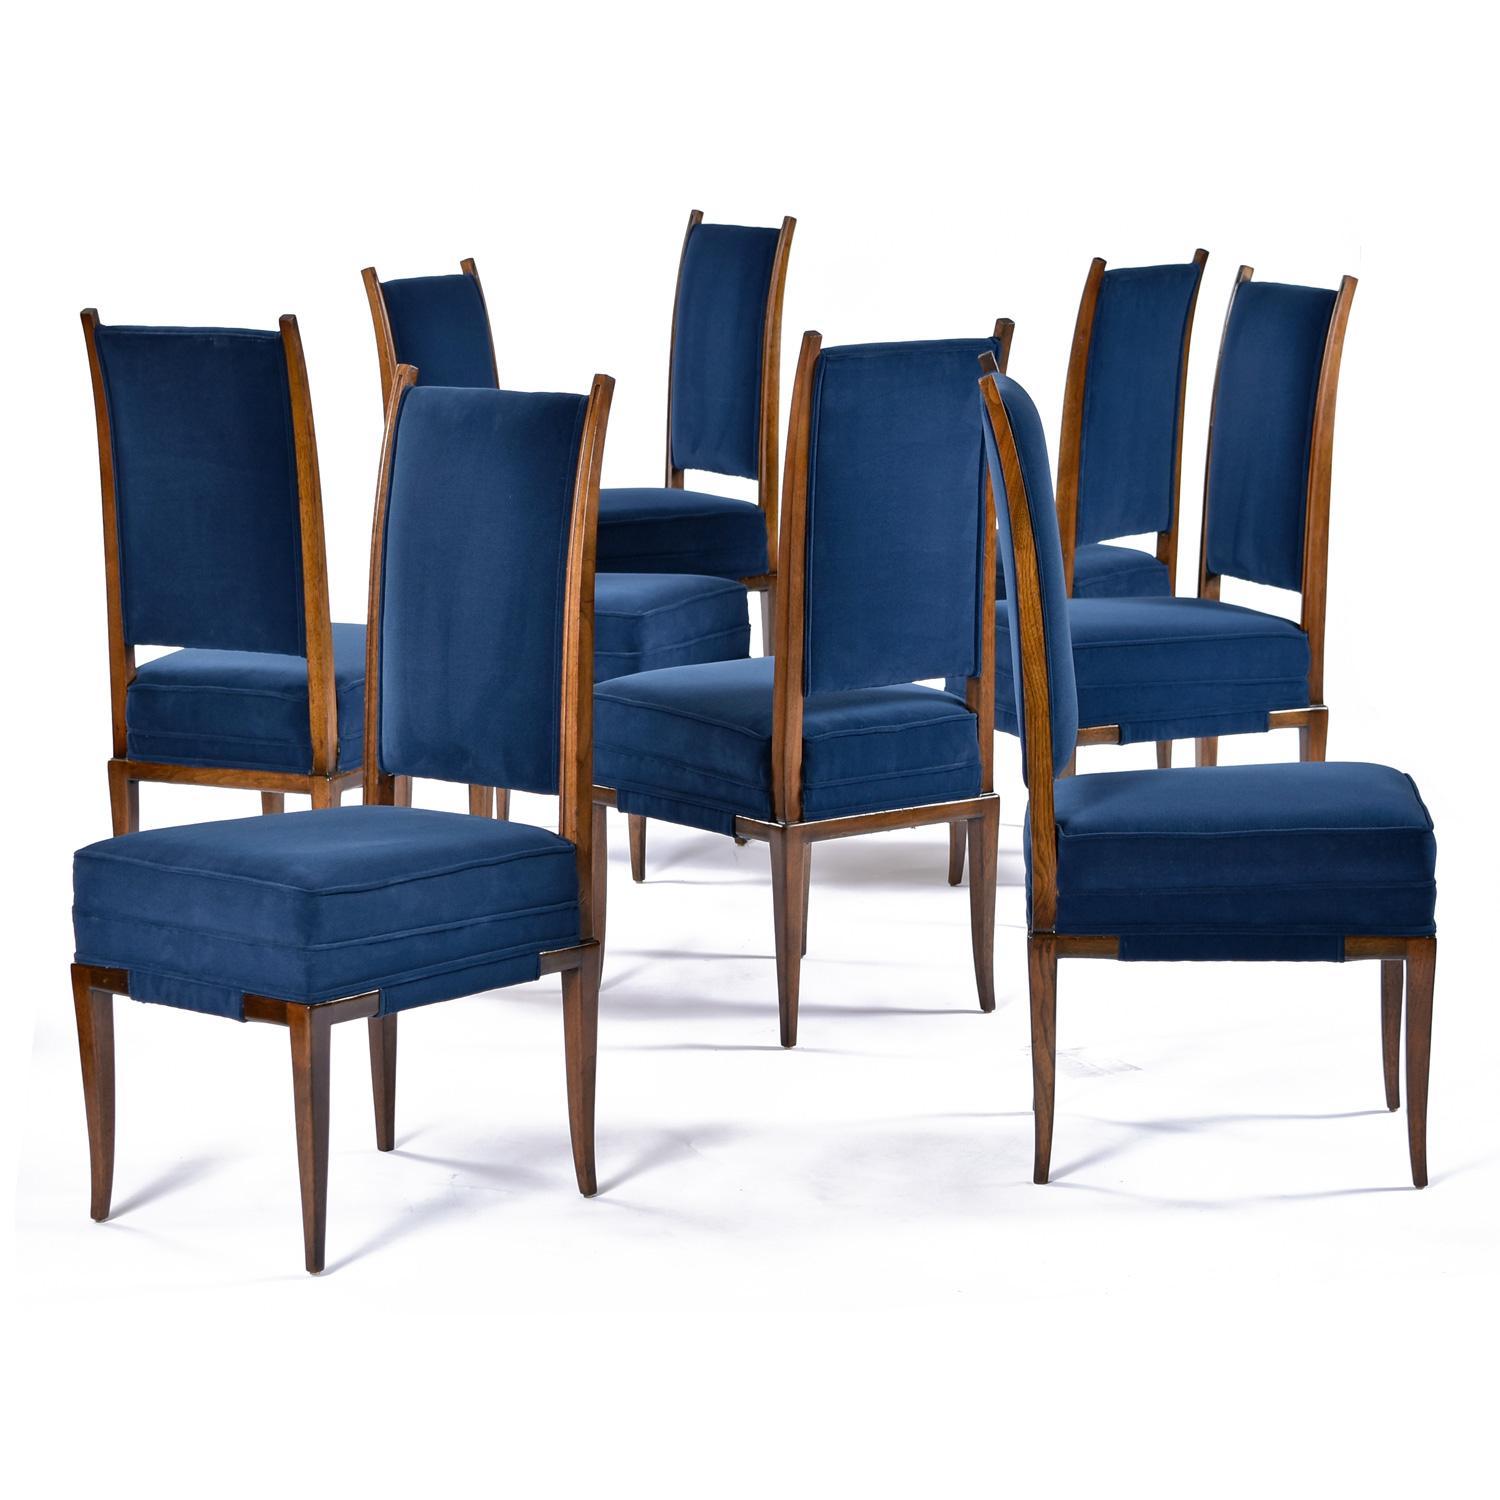 These Tommi Parzinger chairs exude dignified glamour in this sultry blue velvet material.  We purchased this set from a decorator who spent thousands on this Kravet fabric and re-upholstery, only to have the project fall through.  And that's when